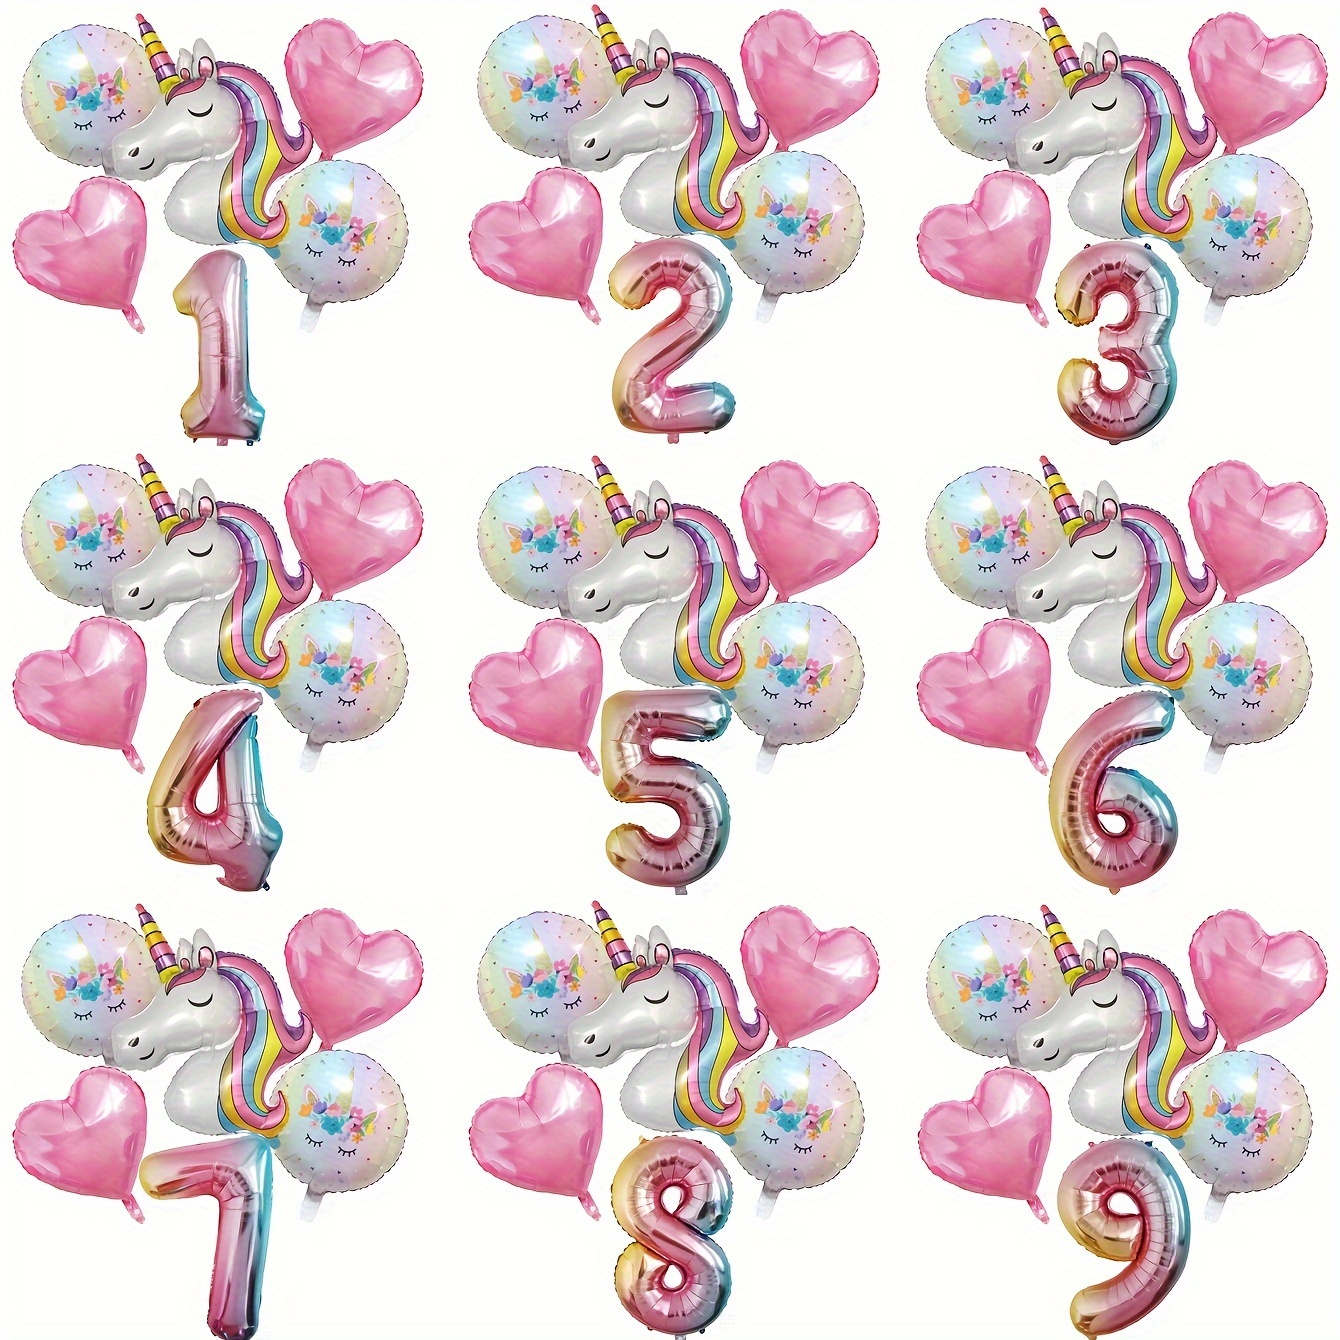 

6pcs 32in Digital Balloon Set 0-9 Magic Cute Balloon Decoration Set - Perfect For Birthday, Coming Of Age And Party, Indoor And Outdoor Decoration